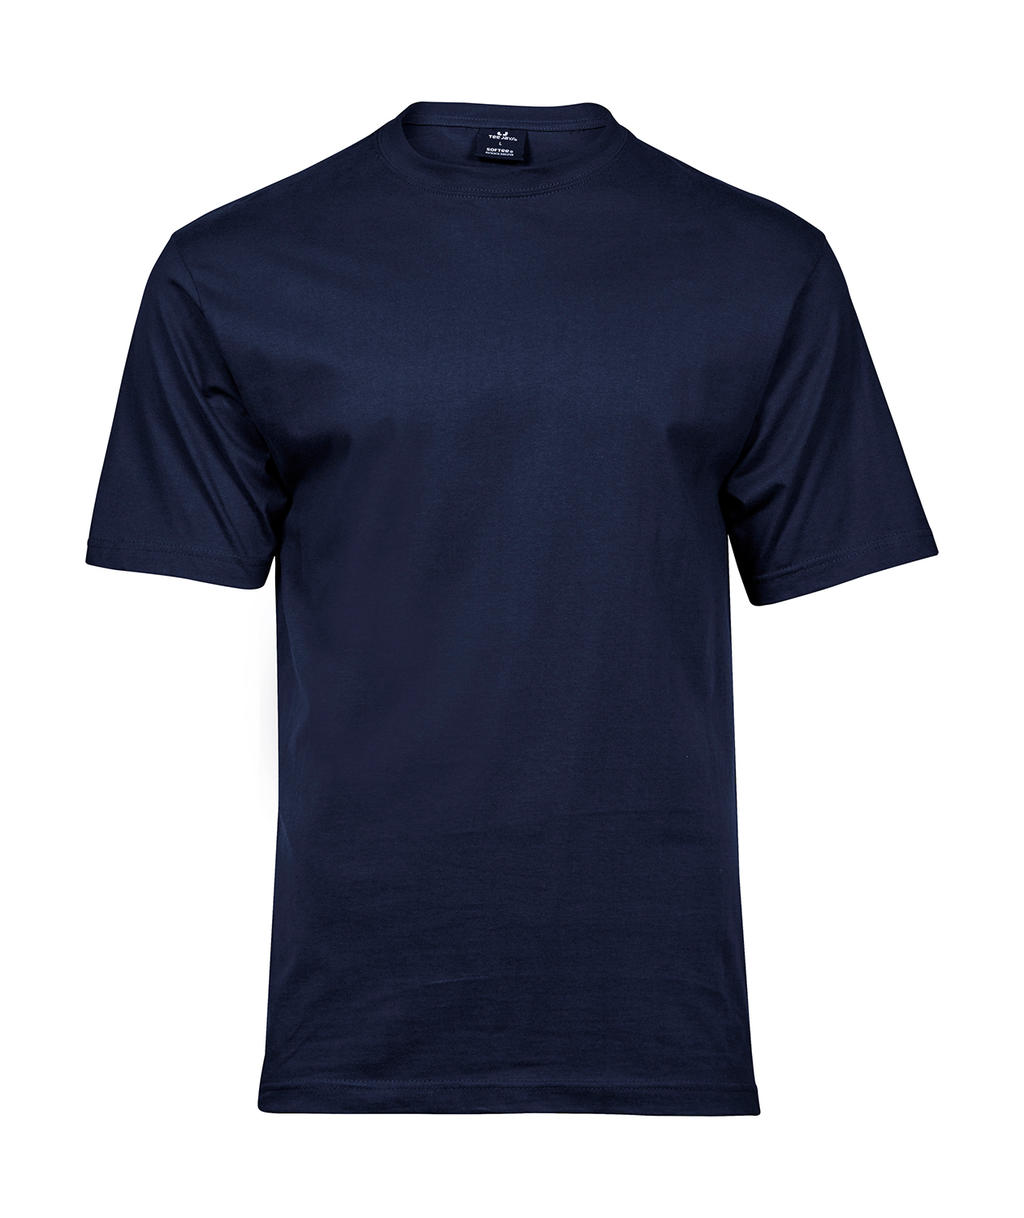  Sof Tee in Farbe Navy